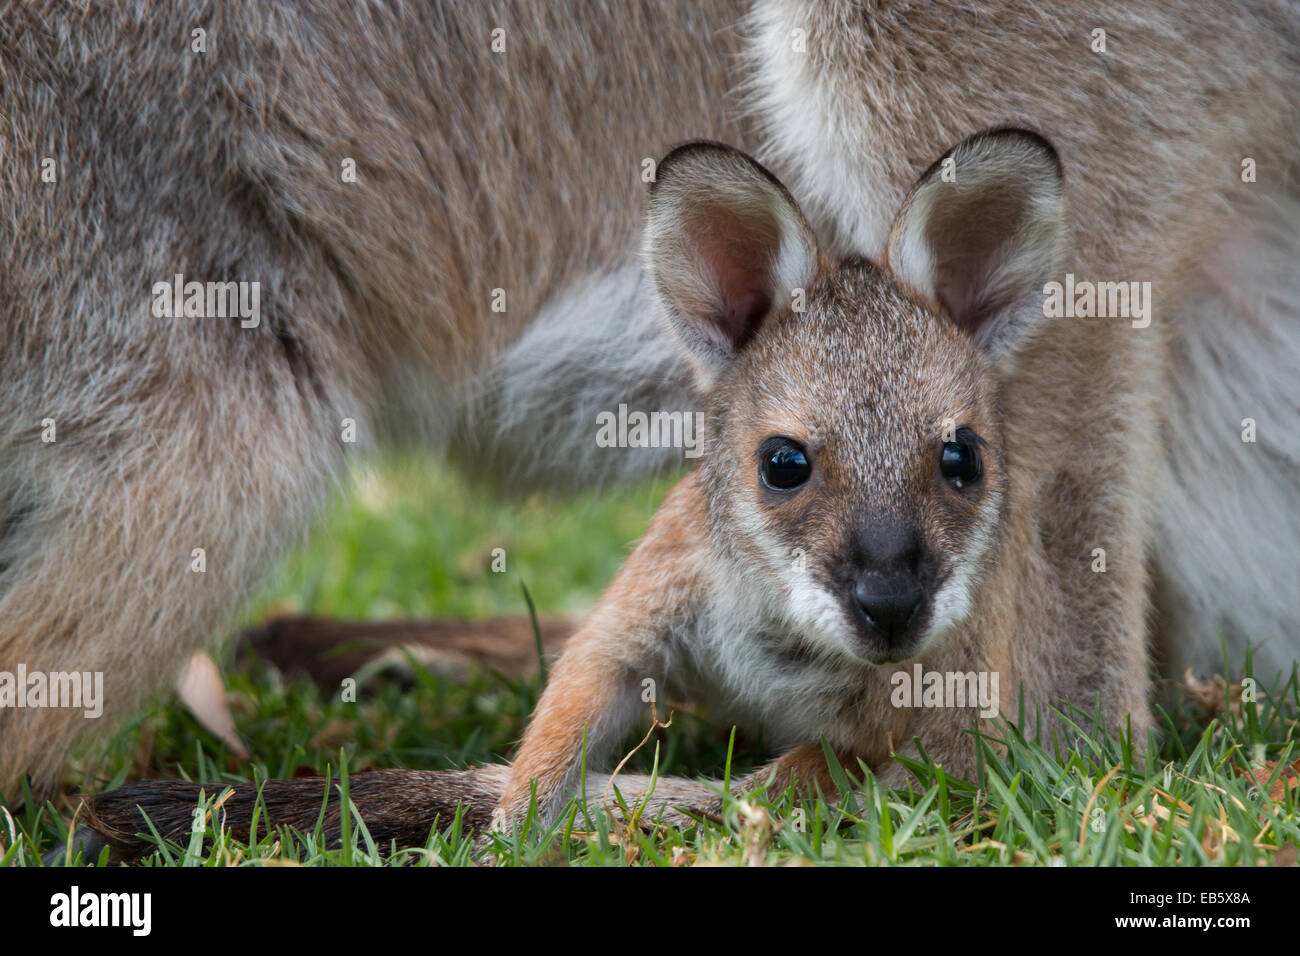 young Red-necked Wallaby (Macropus rufogriseus) joey peering out from its pouch protected by its mother Stock Photo